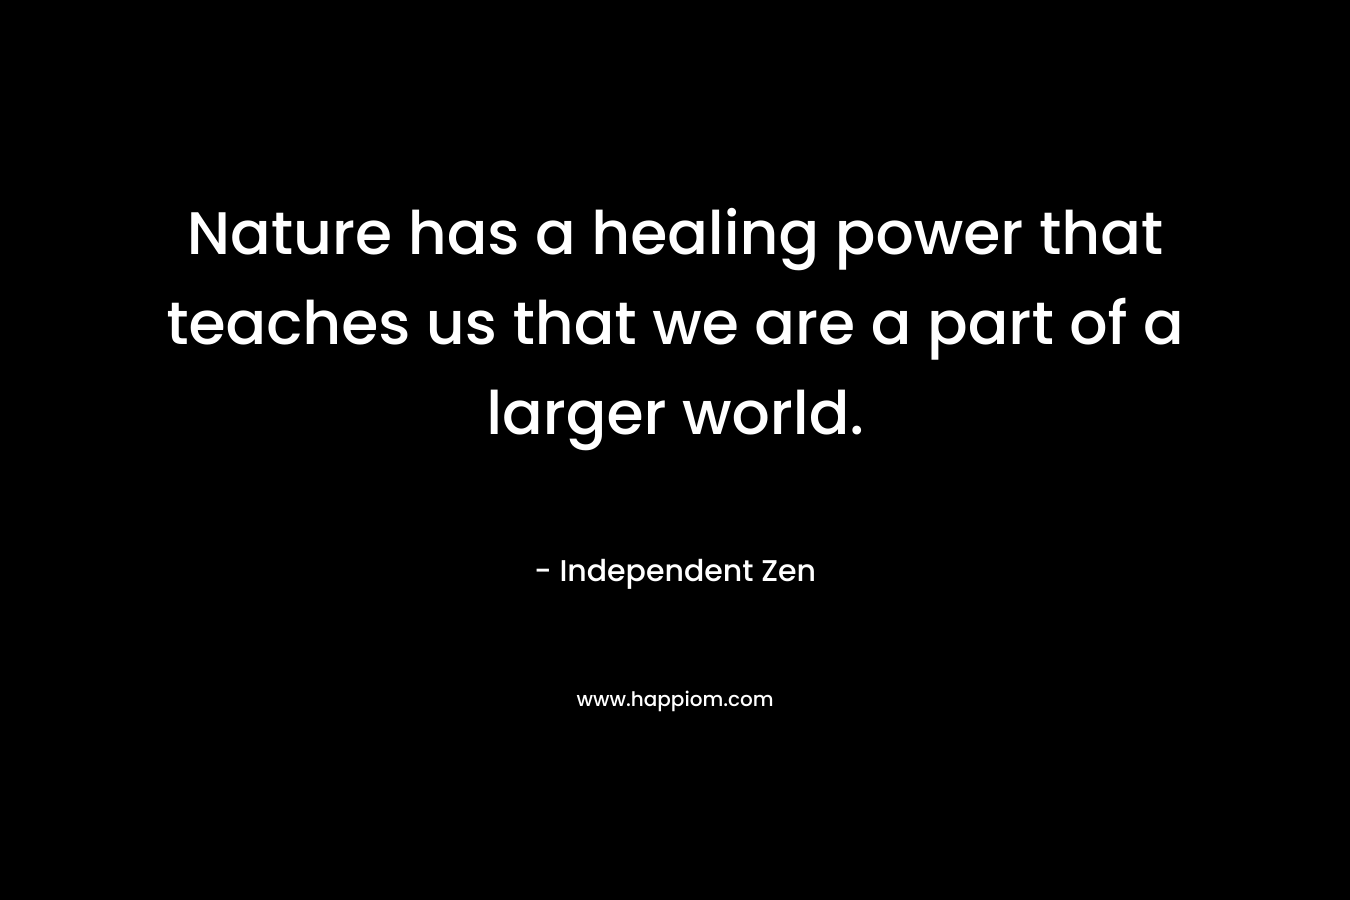 Nature has a healing power that teaches us that we are a part of a larger world.